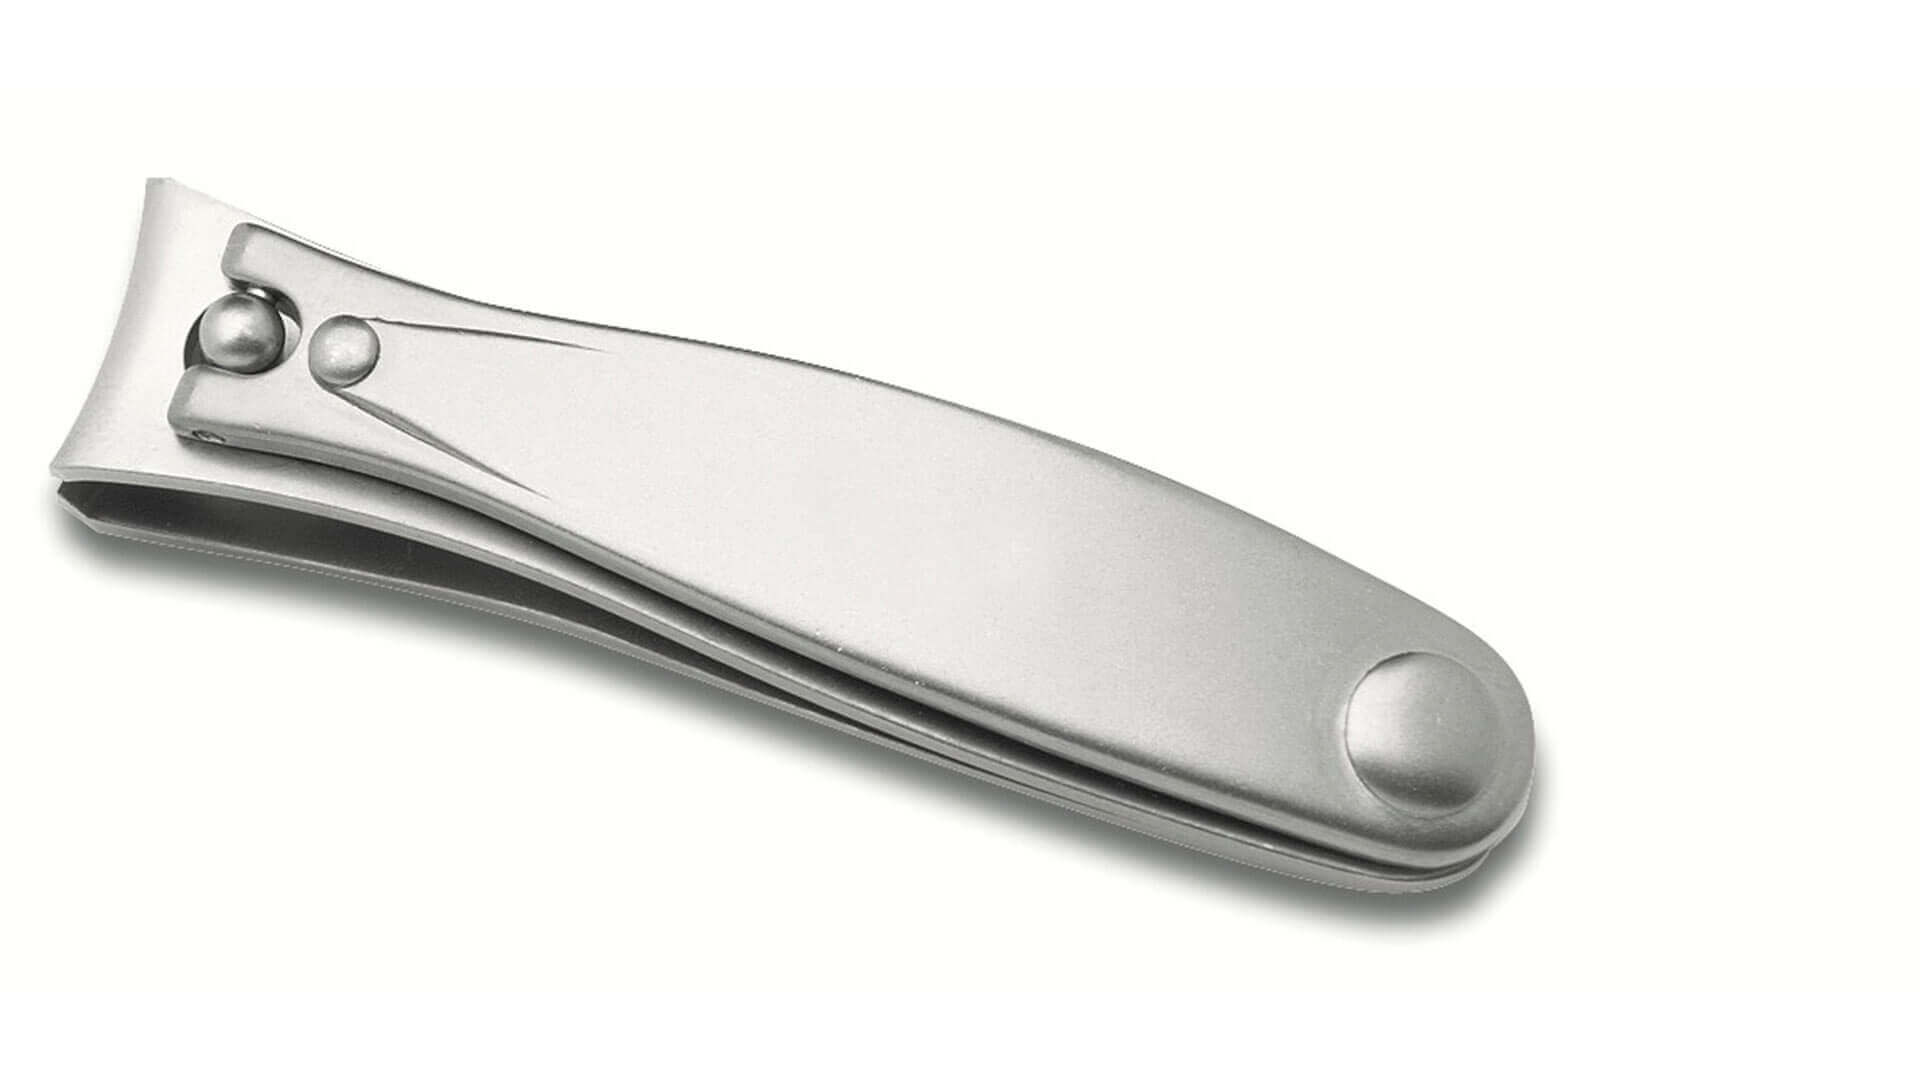 Niegeloh TopInox nail clippers